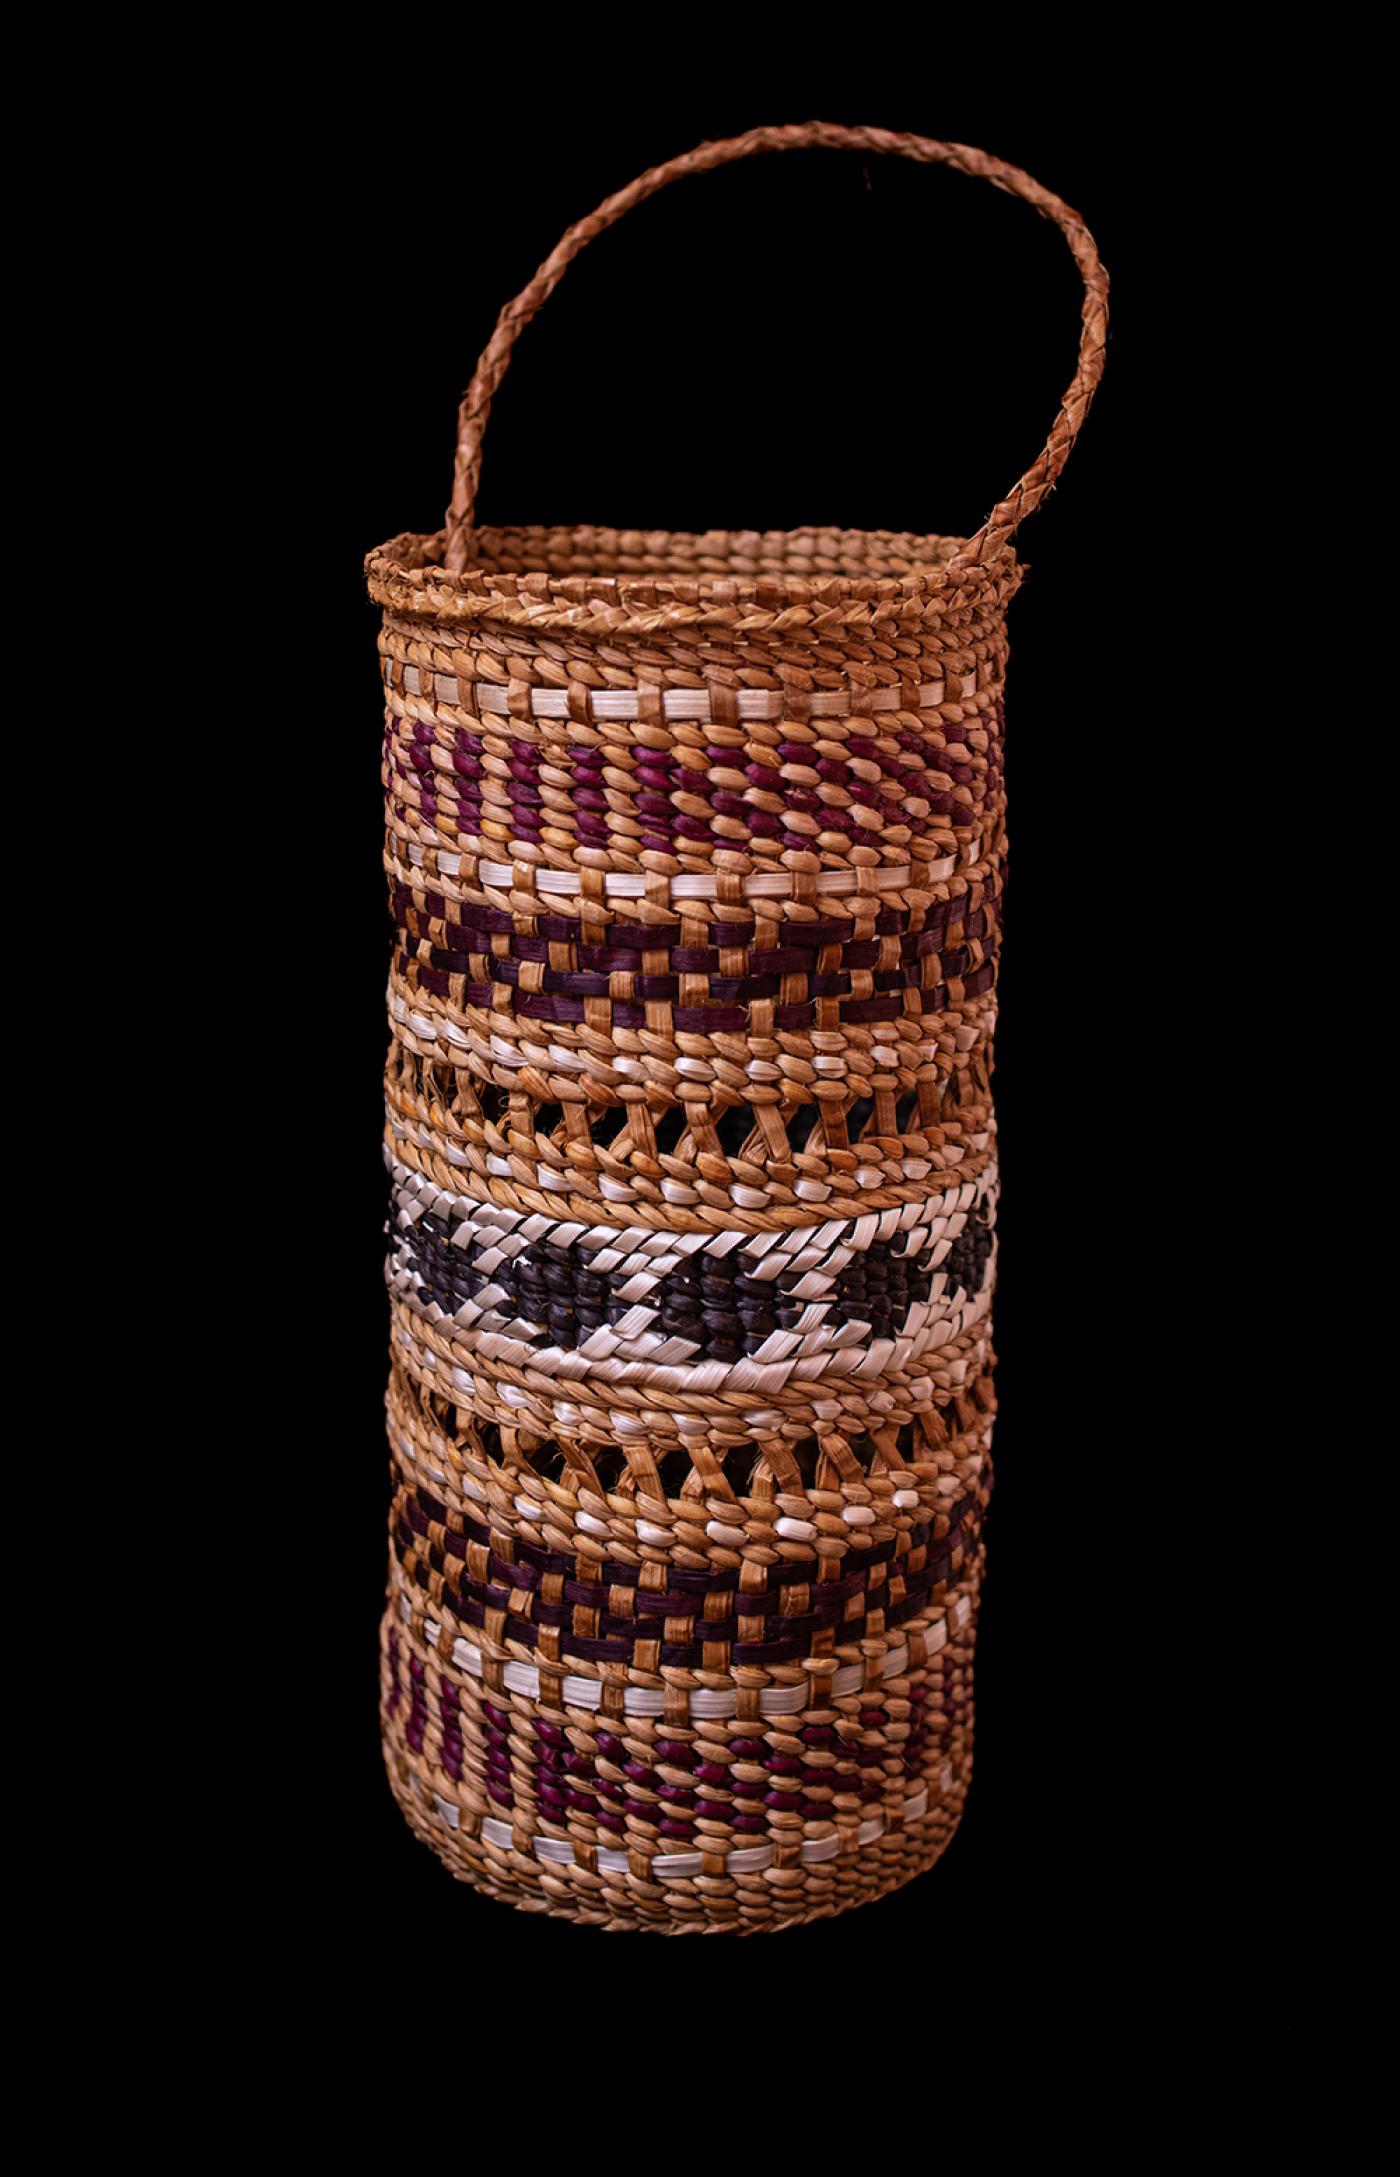 Photograph of a woven cedar bark basket. The basket is tall and narrow with 5 bands of woven patterns.